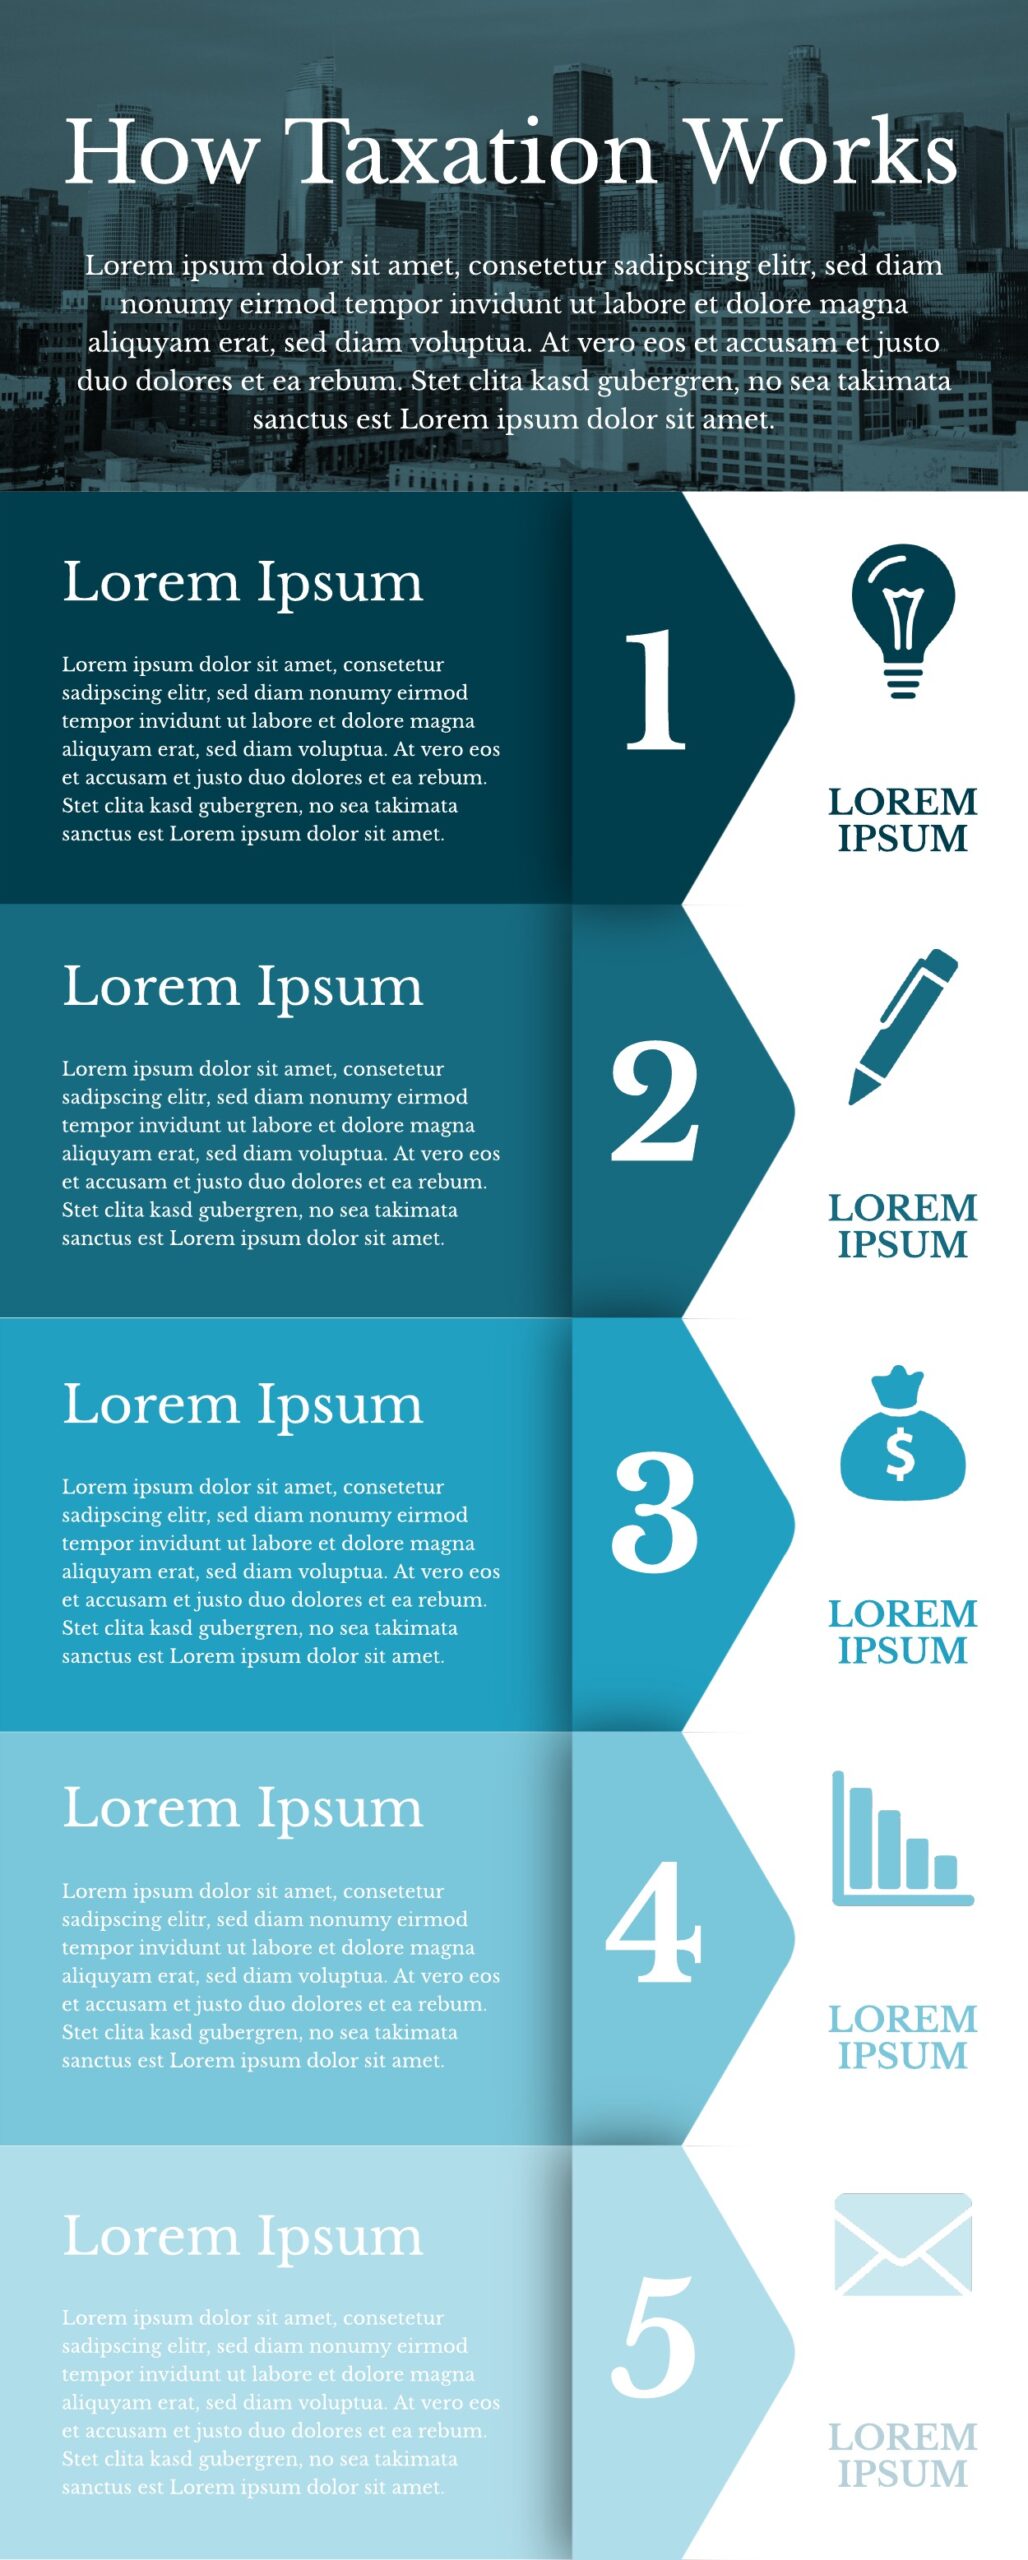 The Ultimate Infographic Design Guide - 13 Easy Design Tricks